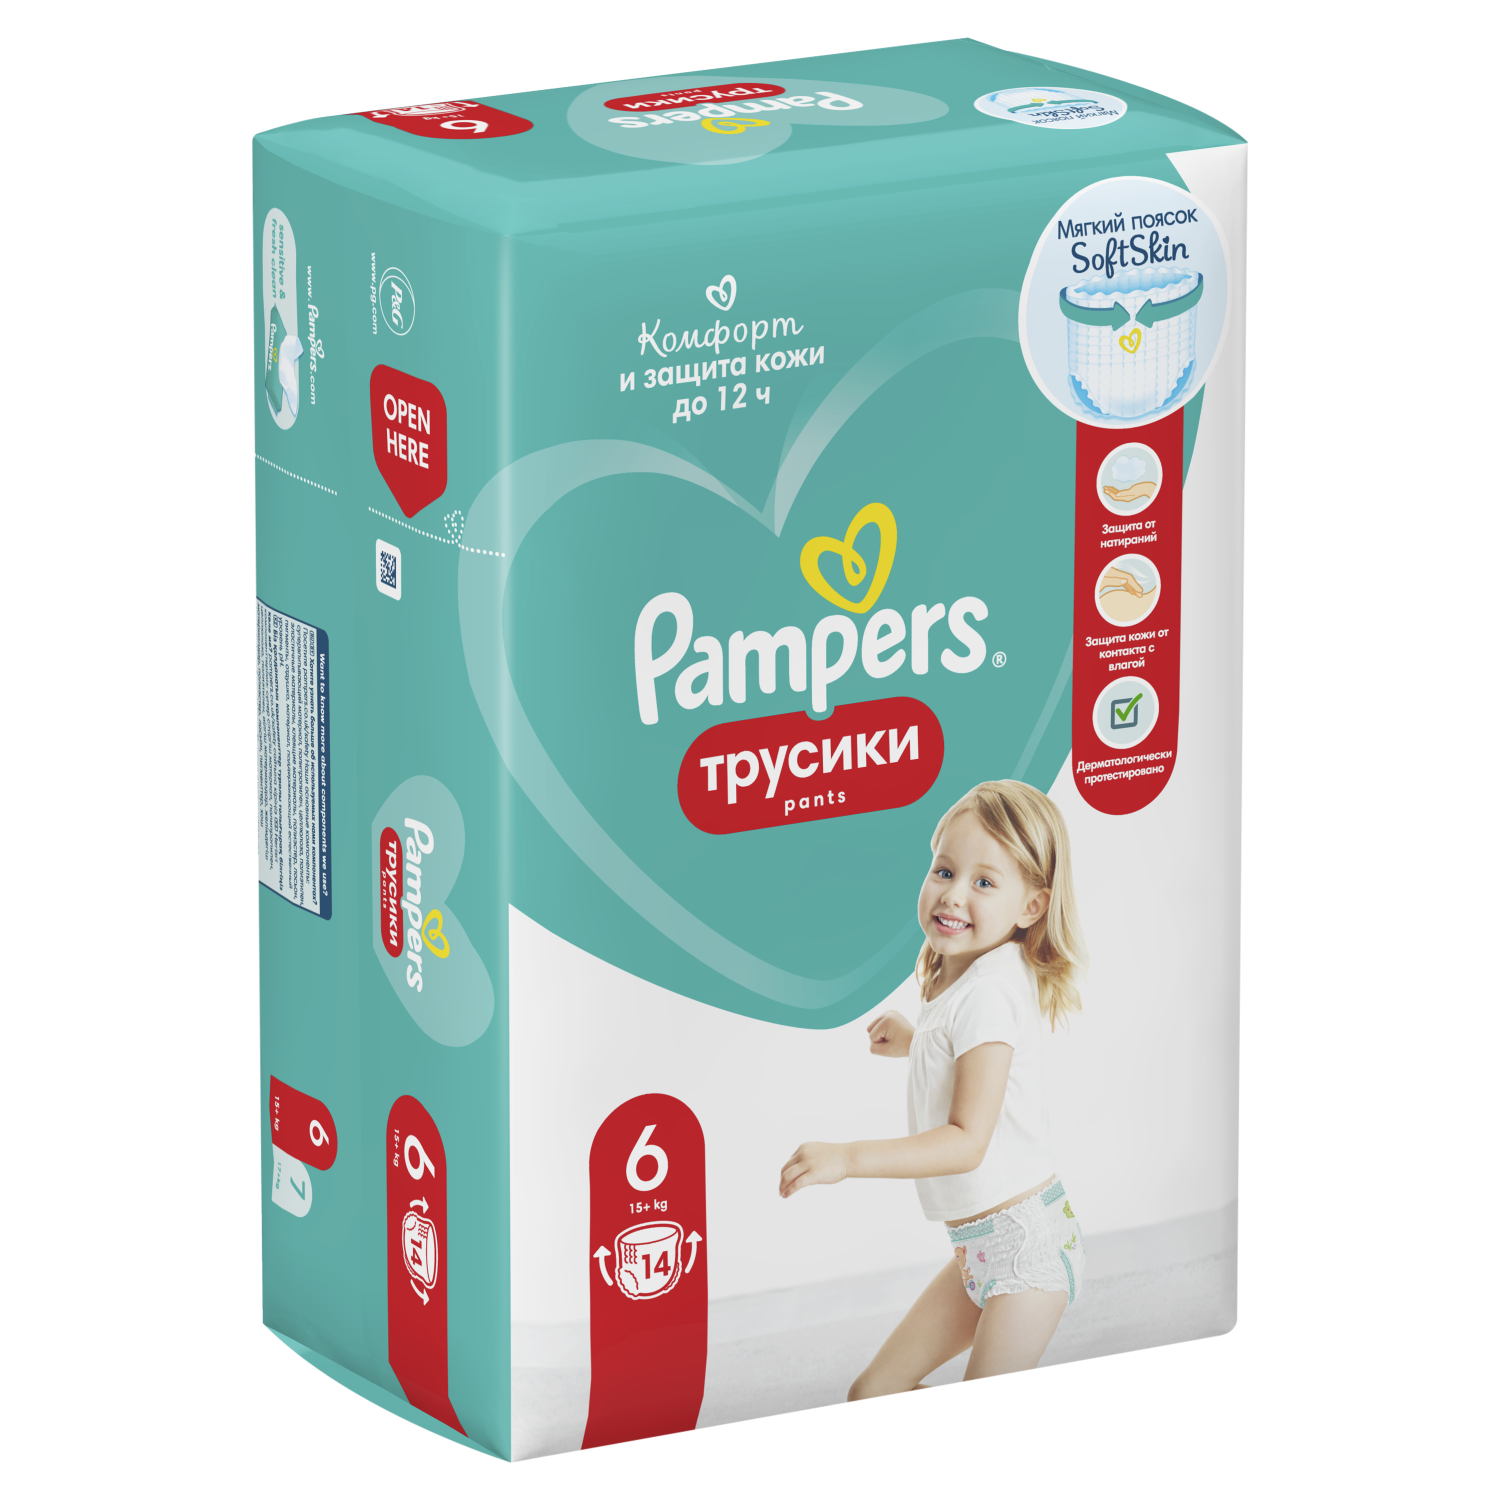 Pampers трусики Pants Extra Large №14 - Добрая аптека